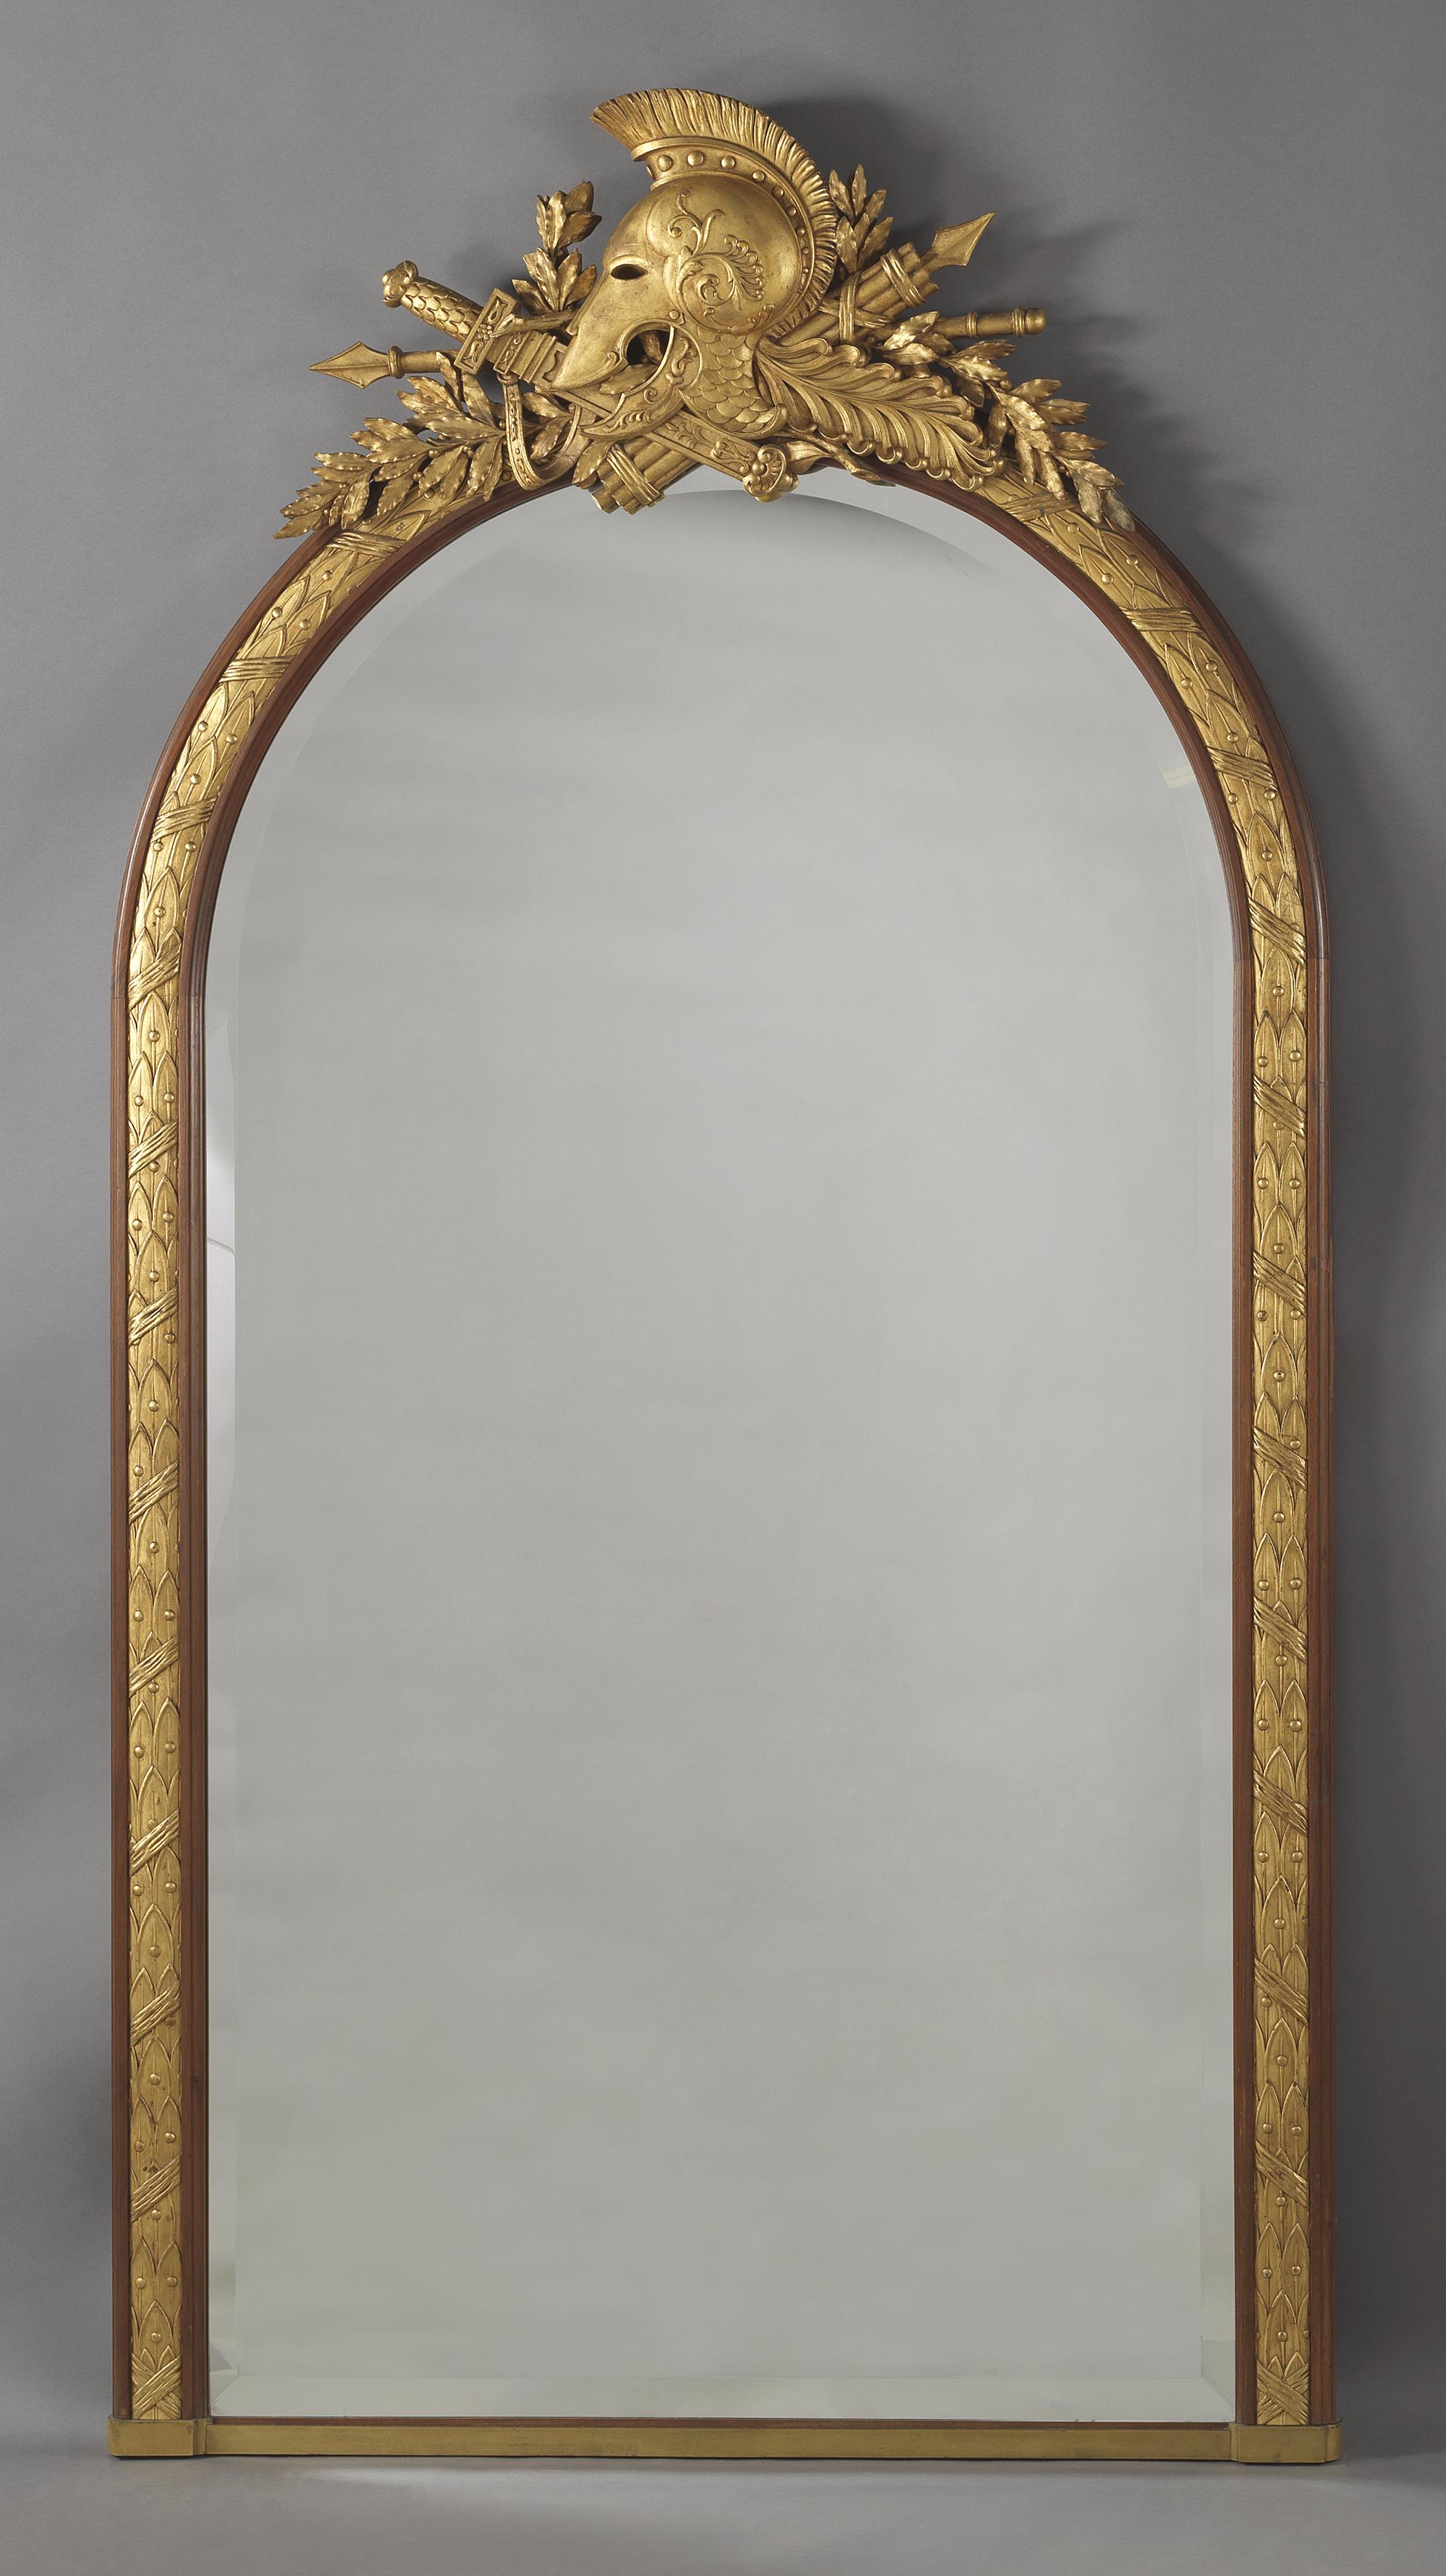 An Empire style mahogany and Parcel gilt overmantel Mirror by ‘Alix A Paris’.

French, circa 1880. 

Stamped 'ALIX A PARIS'. 

The mirror has an arched bevelled plate within a moulded and ribbon-tied, berried laurel surround, it is surmounted